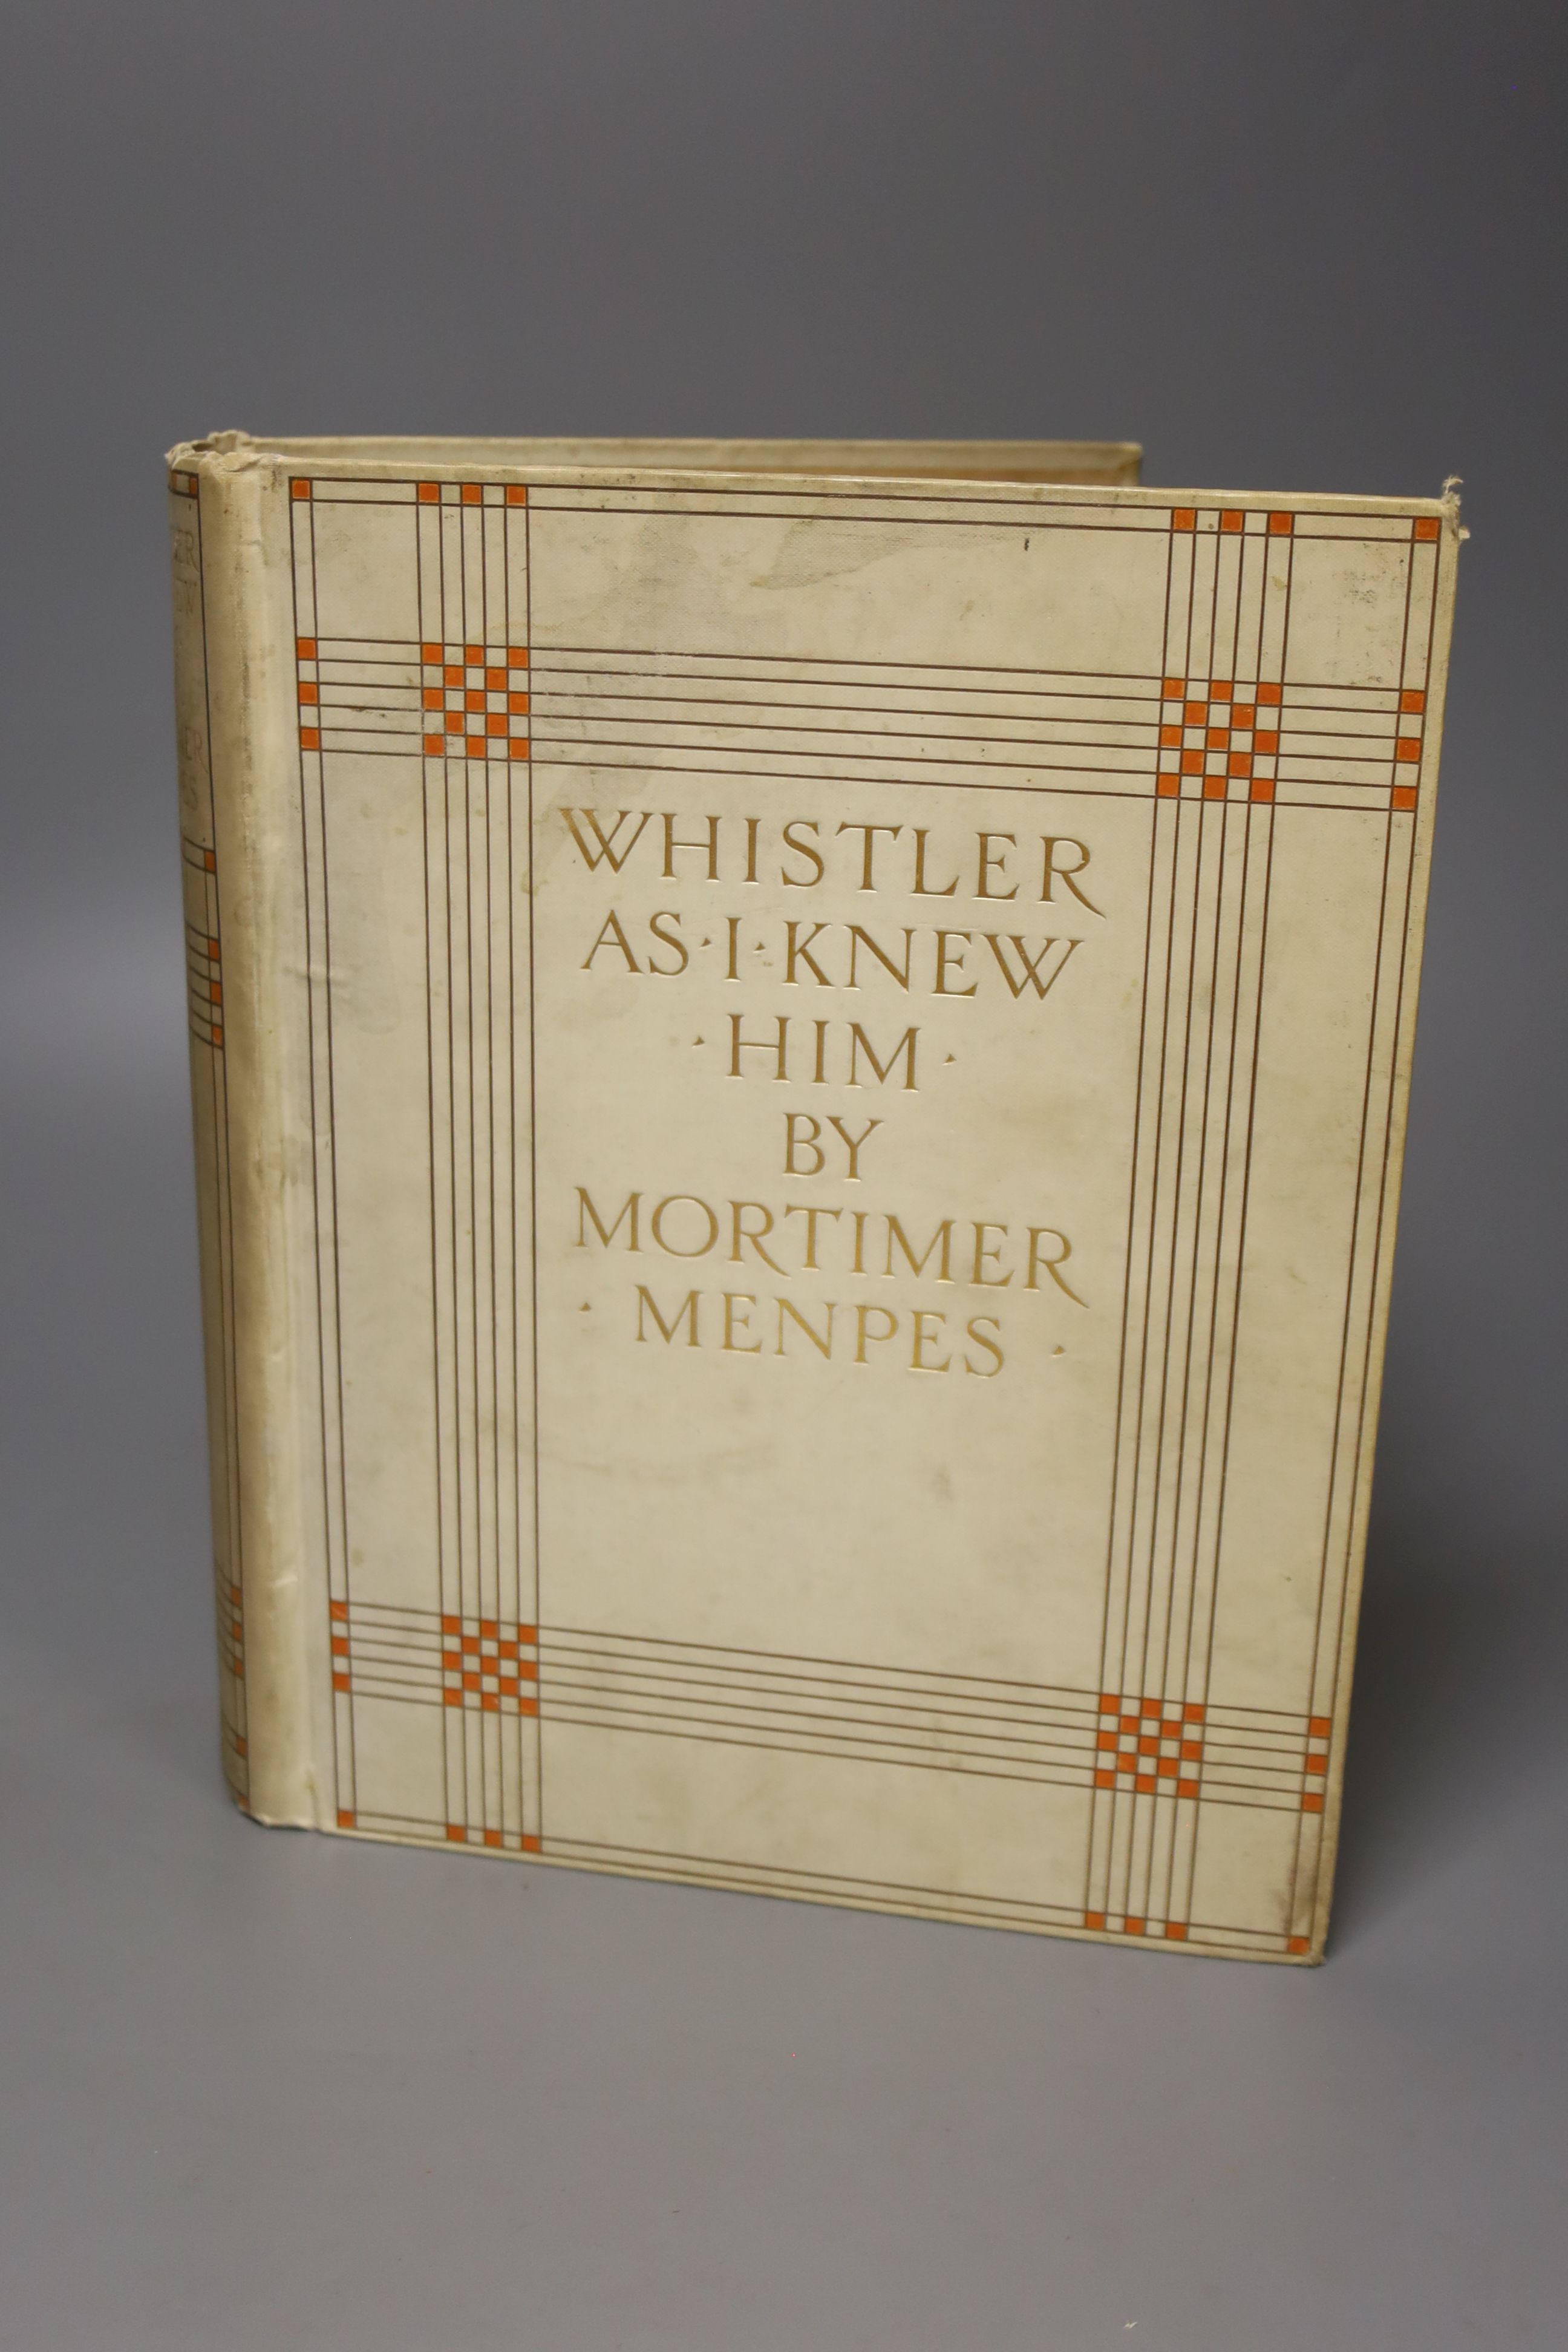 Menpes, Mortimer - Whistler As I Knew Him, limited edition, etched frontis and 125 other plates (some coloured) with thin-paper